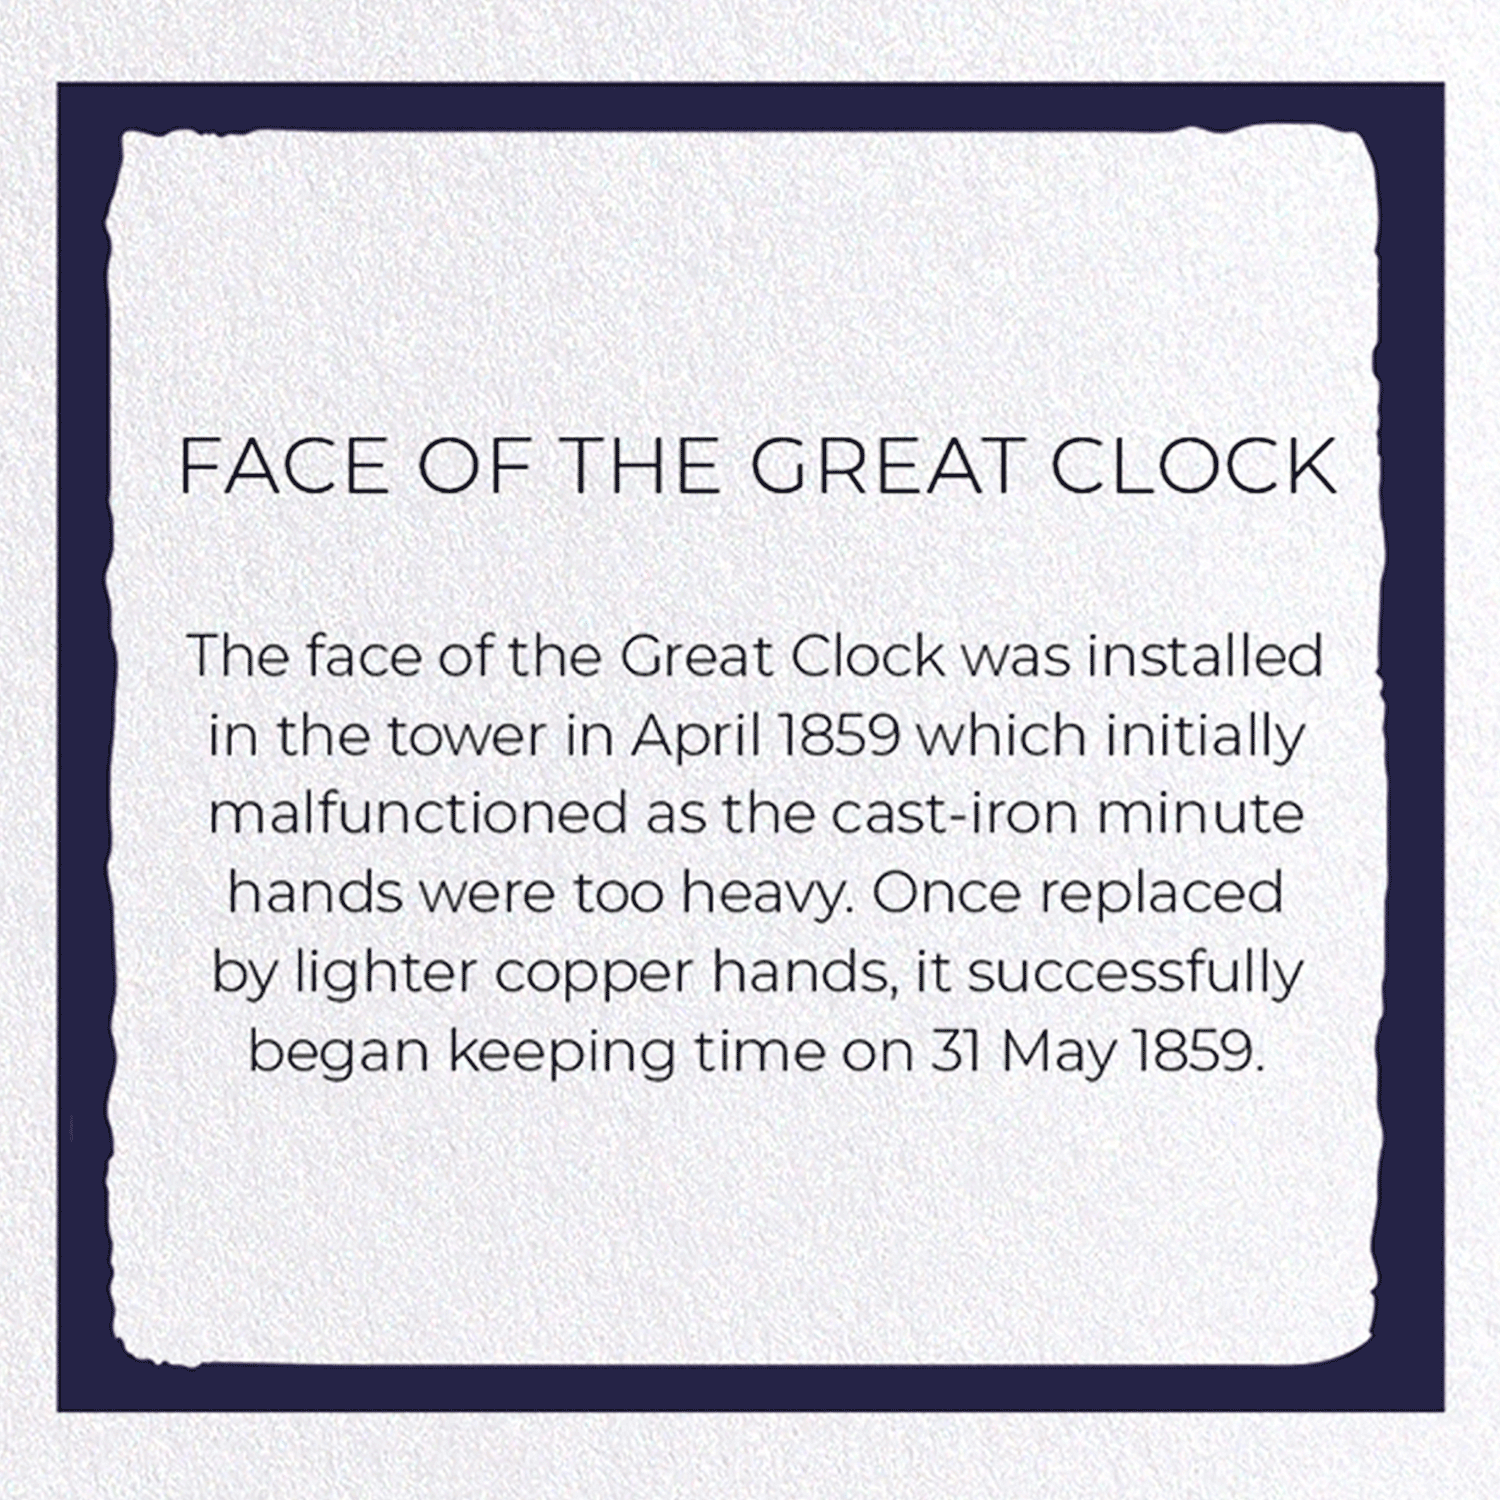 FACE OF THE GREAT CLOCK